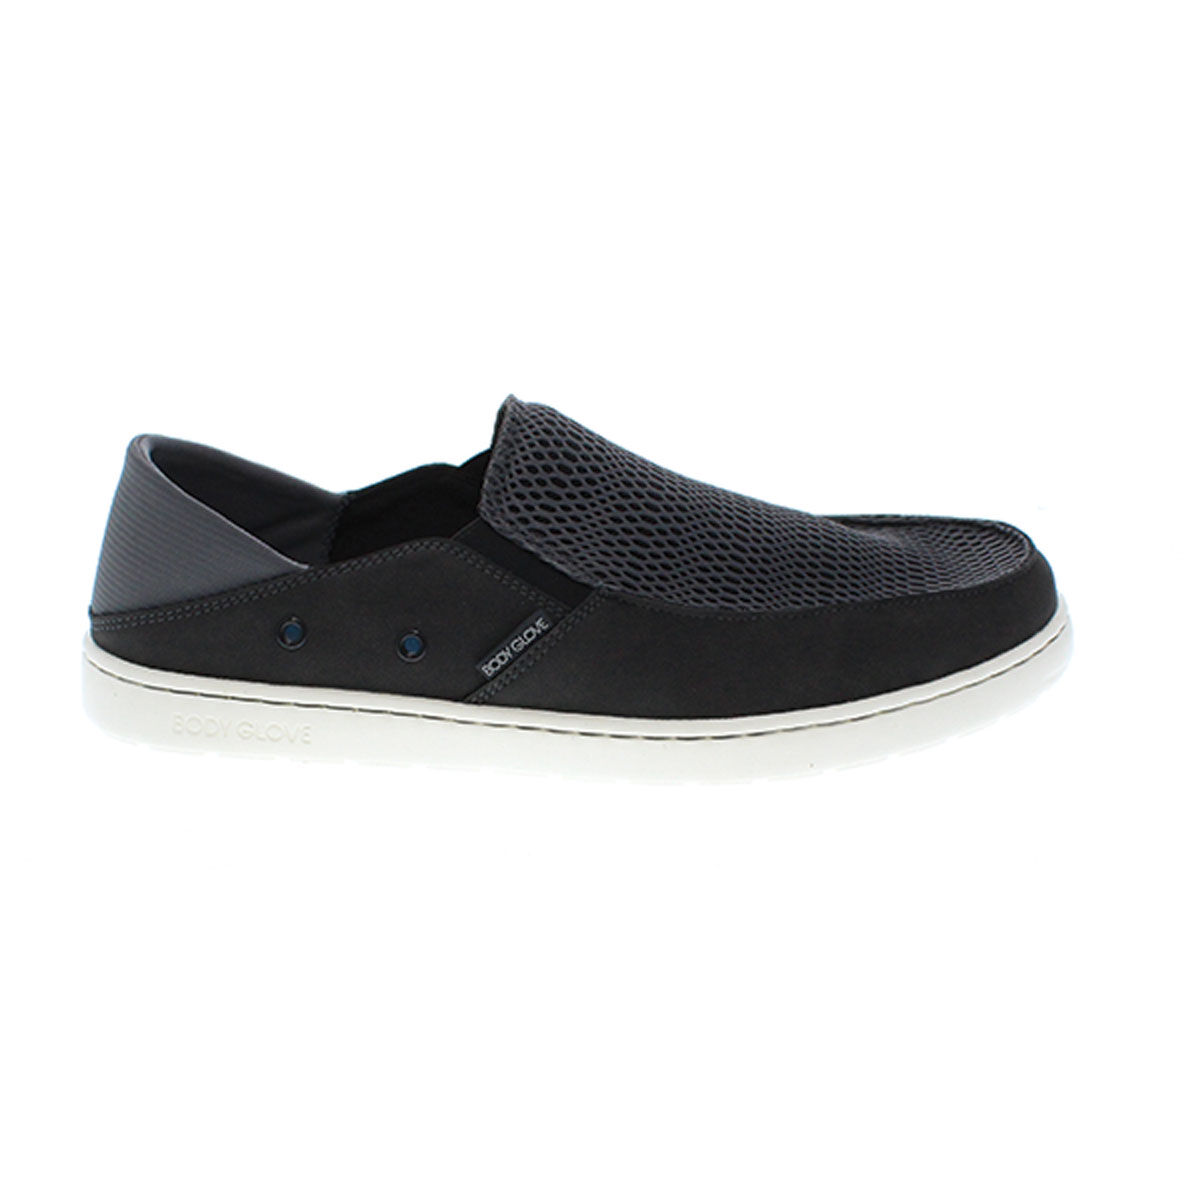 Men's Footwear | Shoes for All Occasions at Dunham's Sports